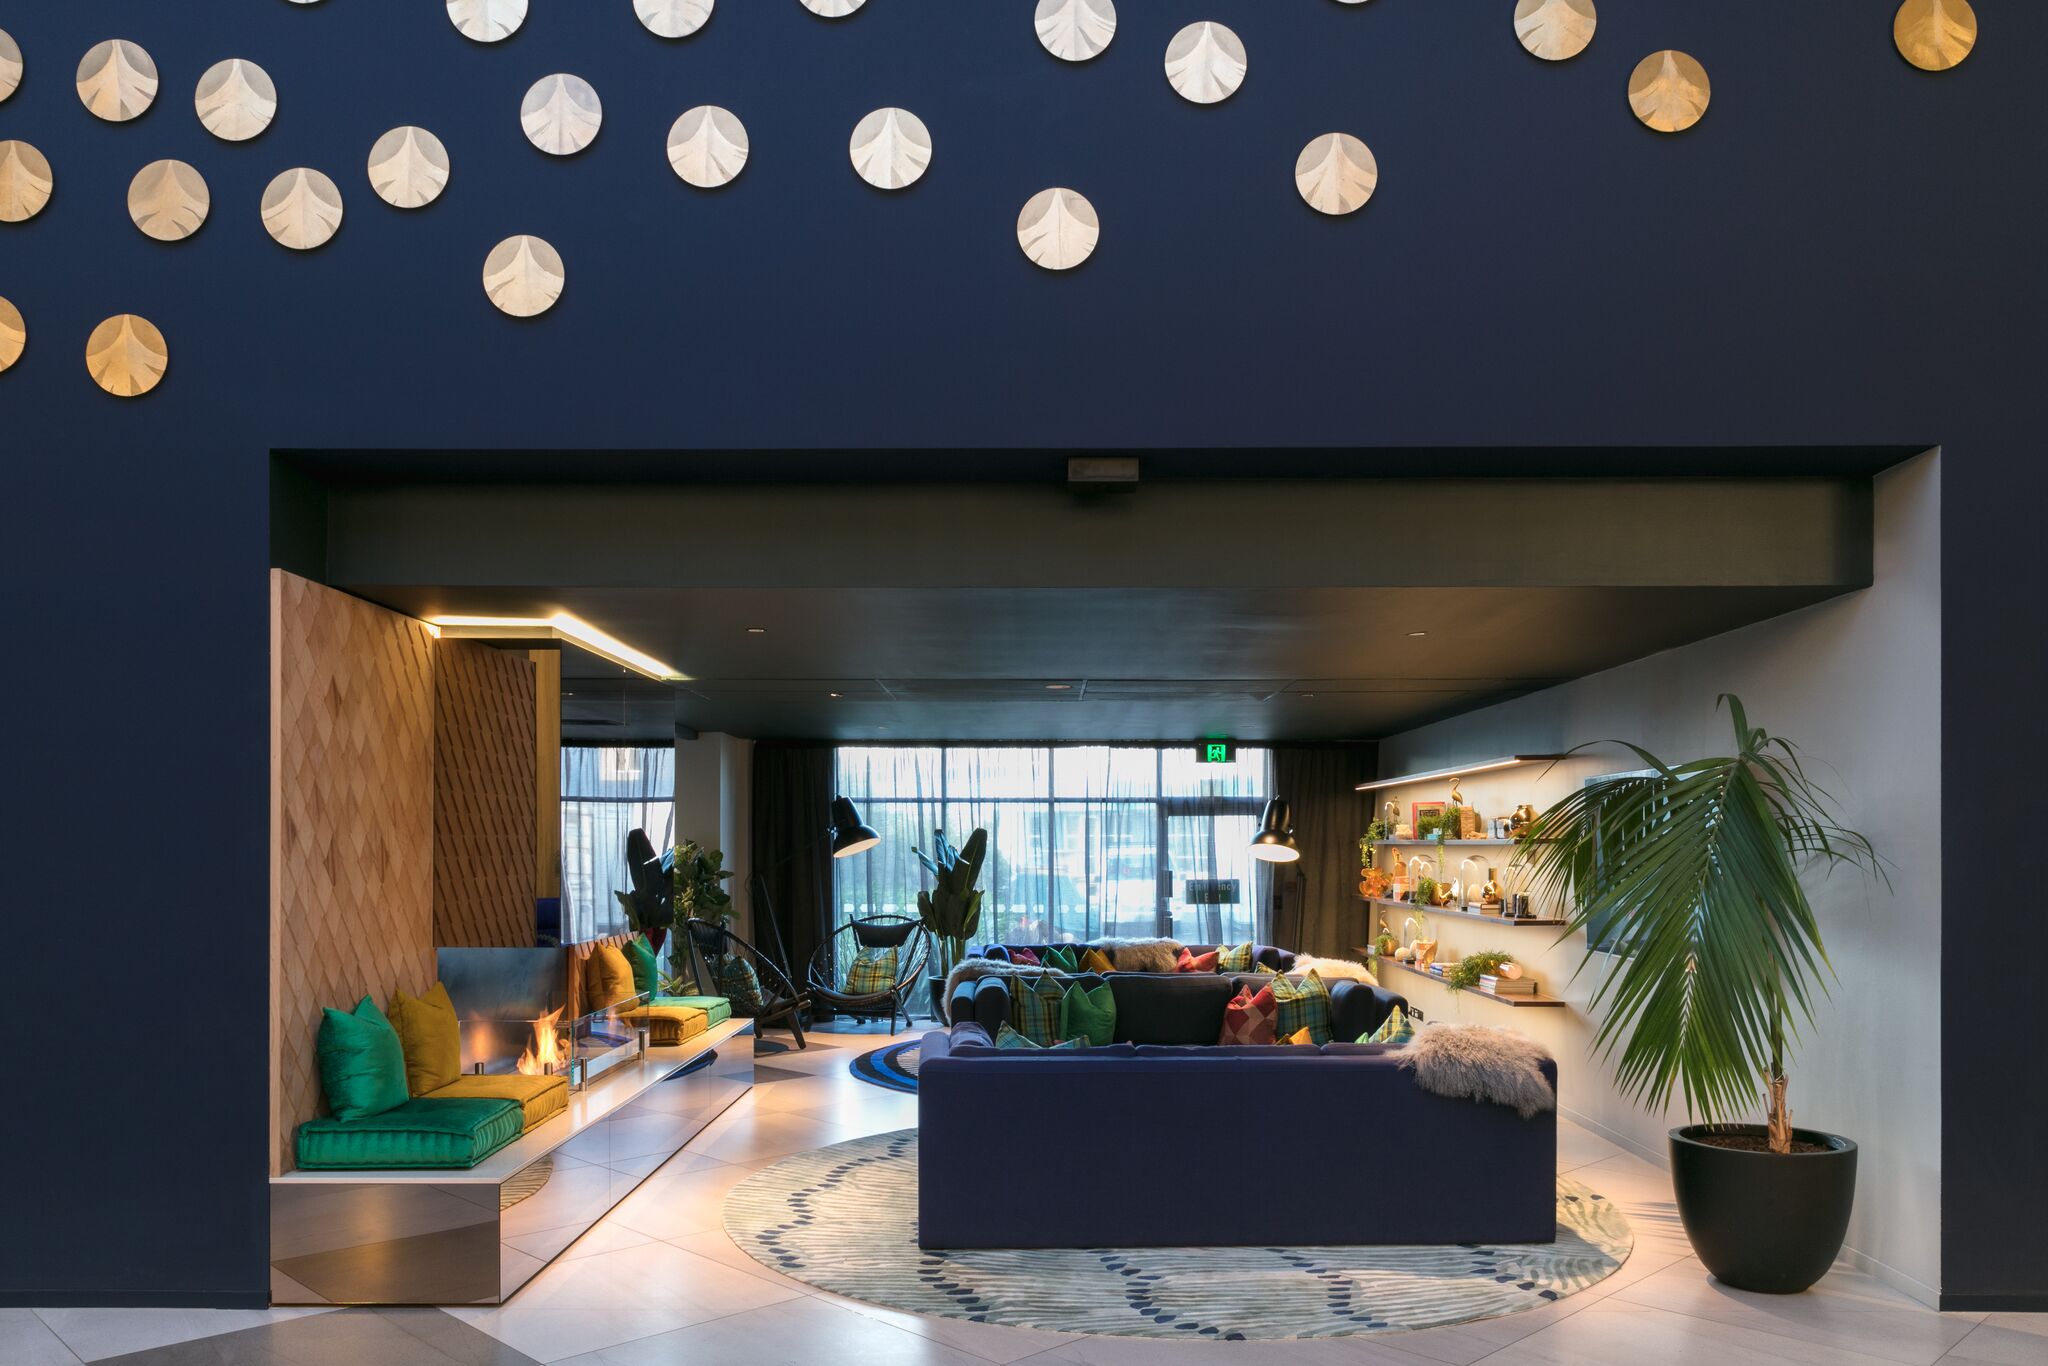  50 New Hotel Openings For 2018 | Australia-Oceania | Naumi Auckland Airport – Auckland, New Zealand | MaterialCreative--«MichelleWeir-NaumiHotel